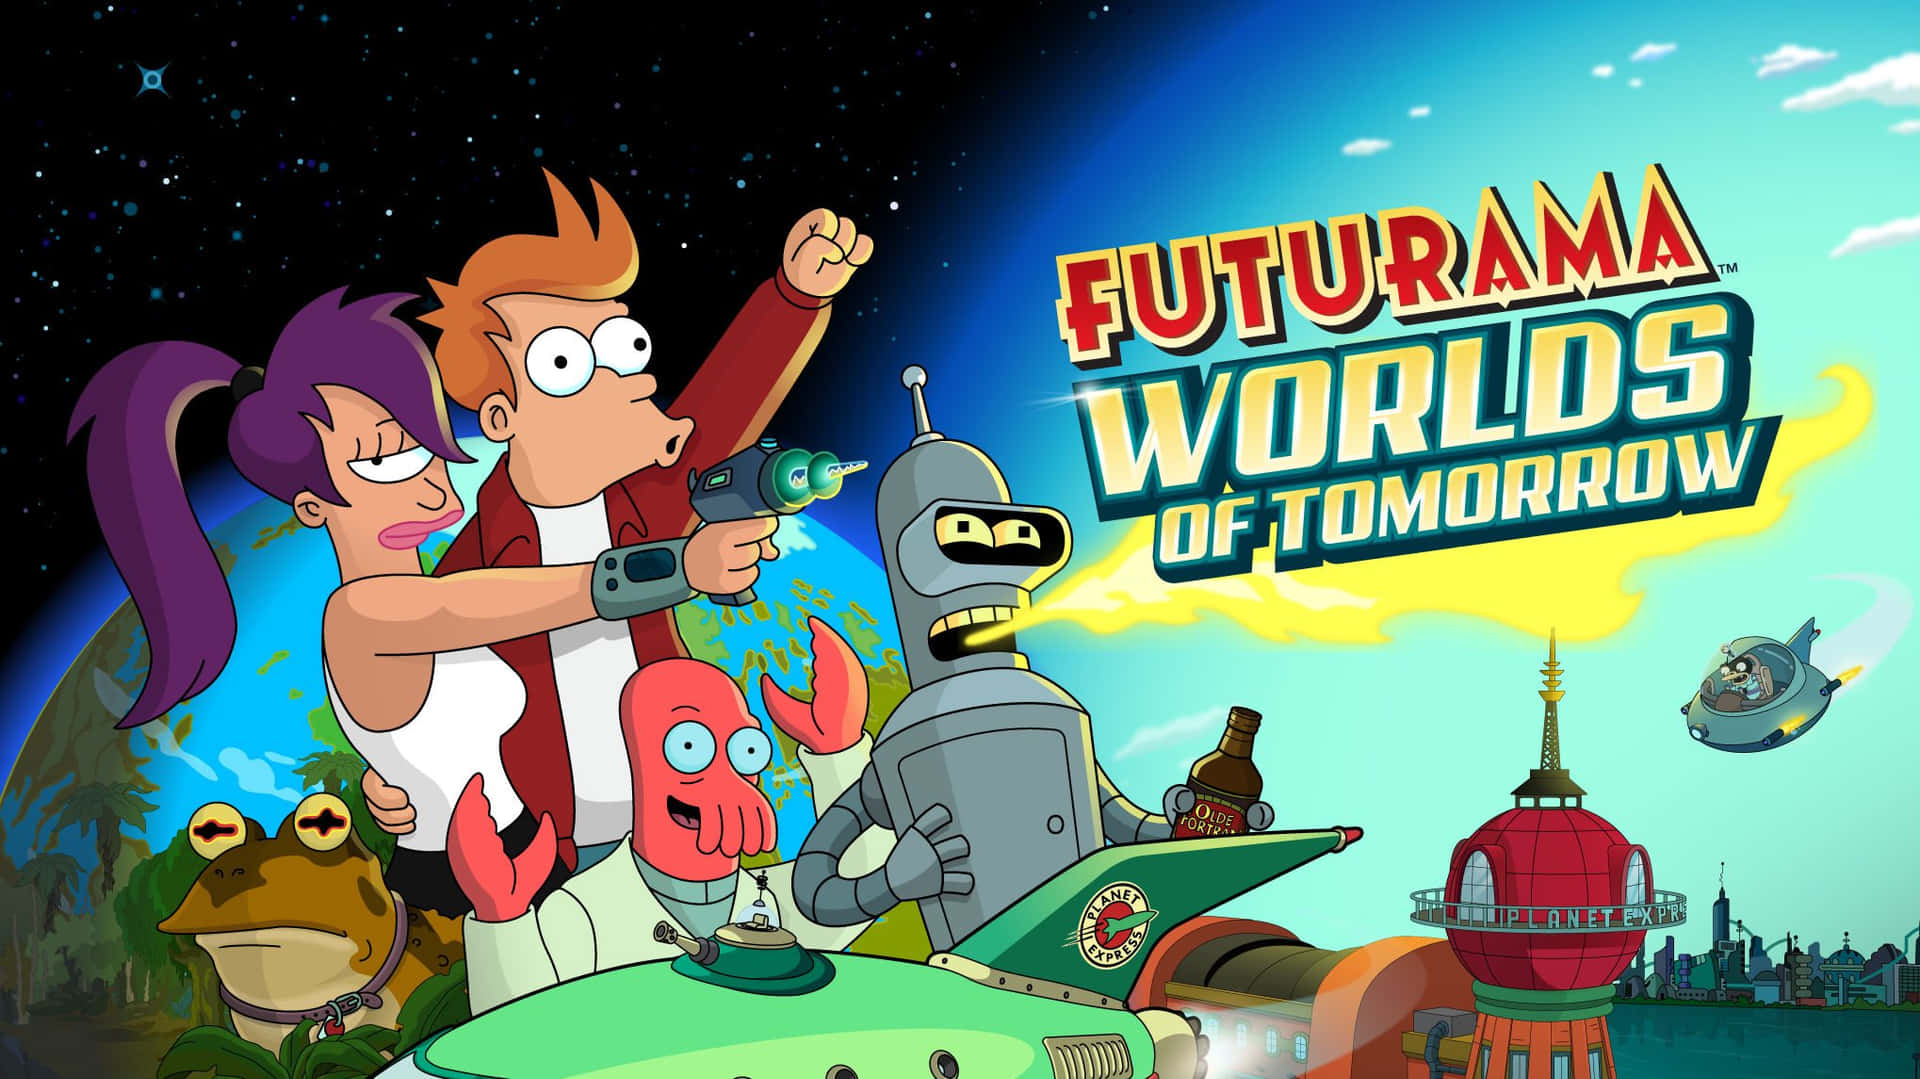 Explore the Universe and Beyond with Fry, Leela and the Crew from Futurama